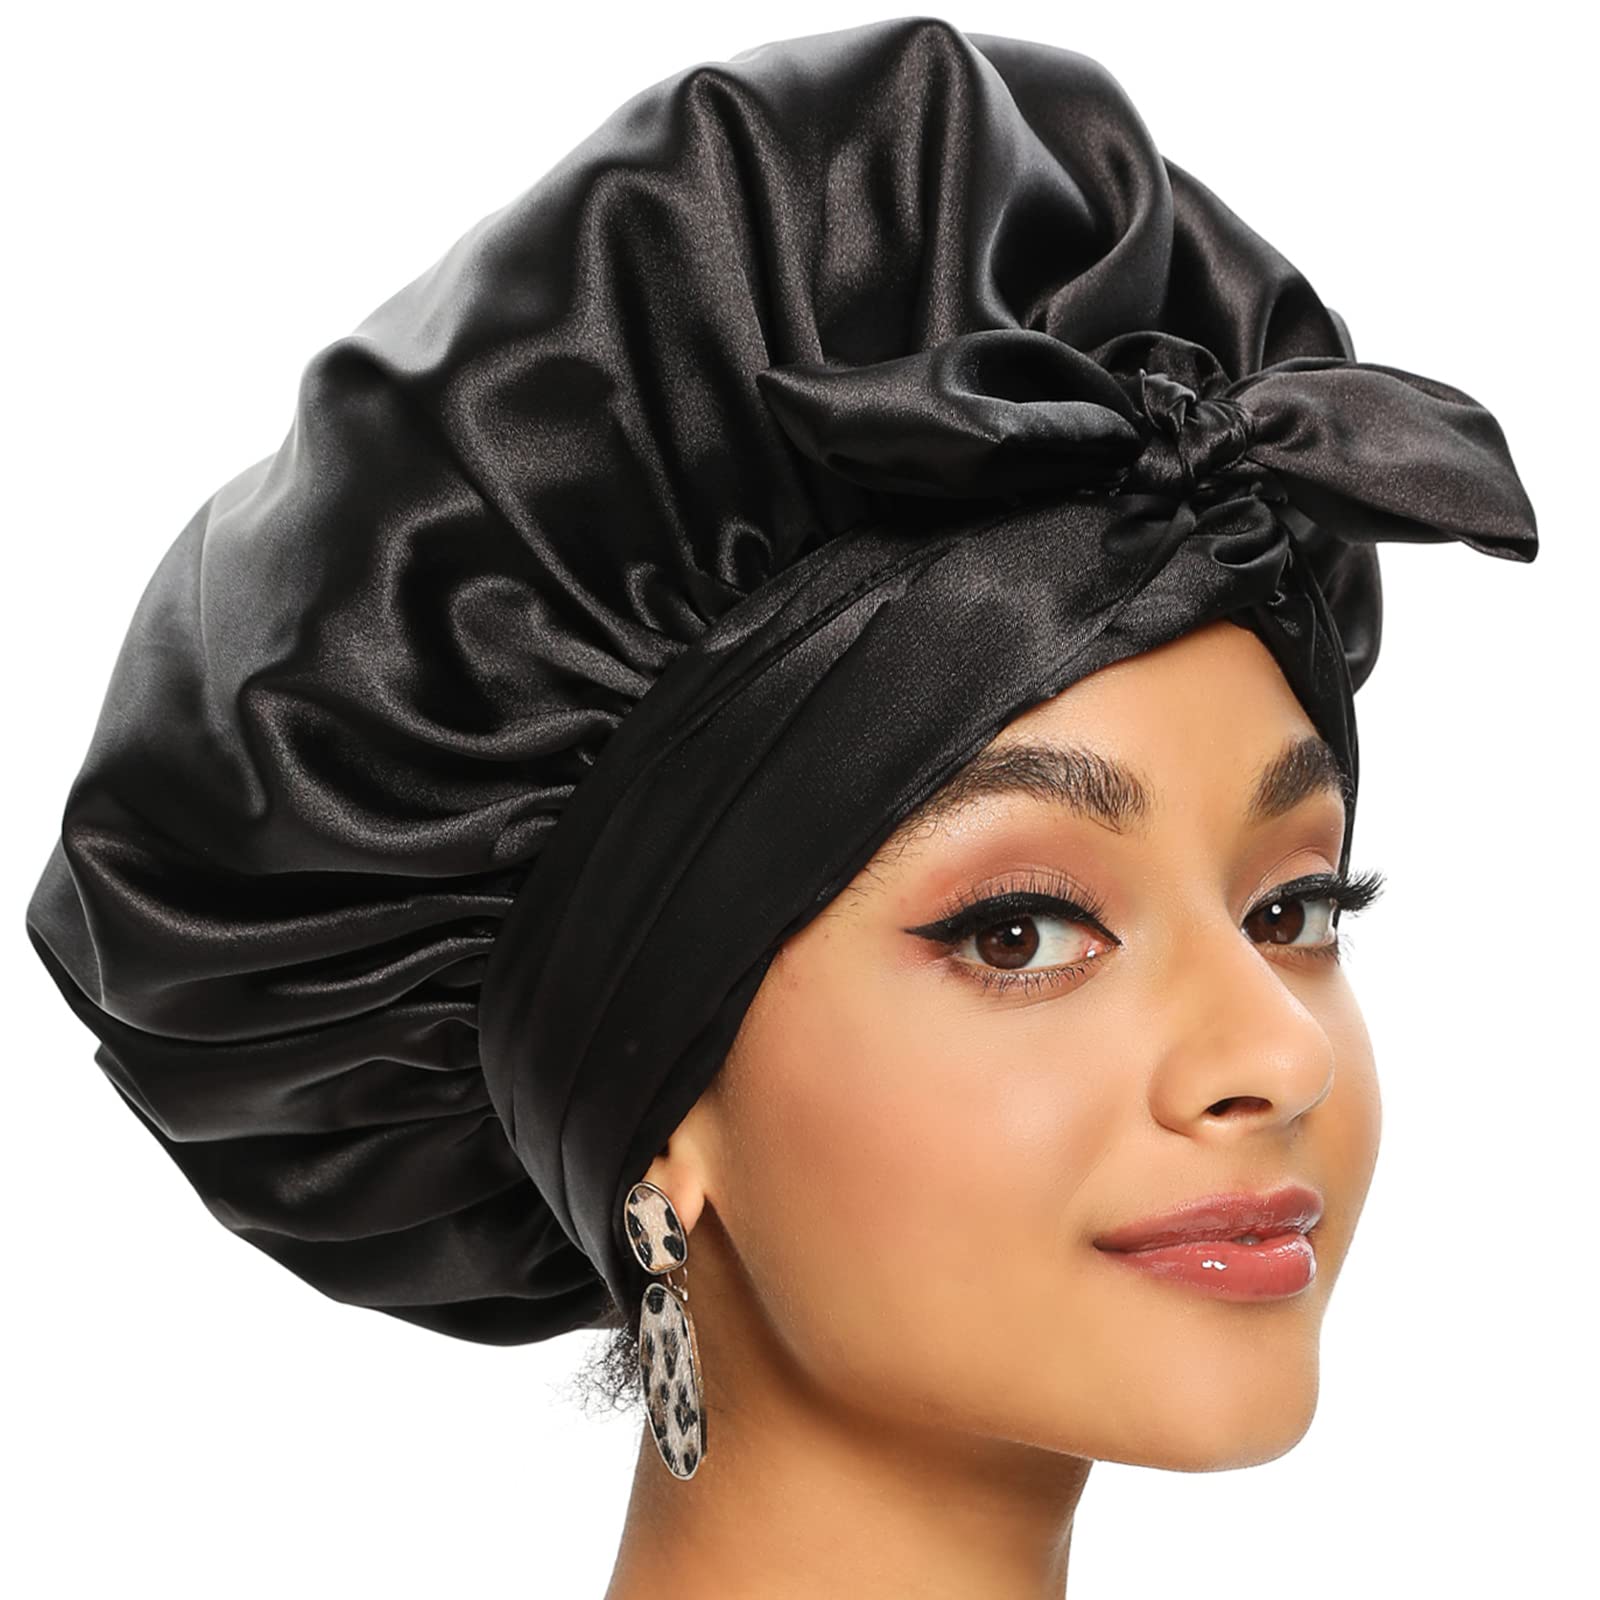 Satin Bonnet for Black Women, Silk Bonnet for Curly Hair Wraps for  Sleeping, Satin Scarf for Hair Wrapping at Night